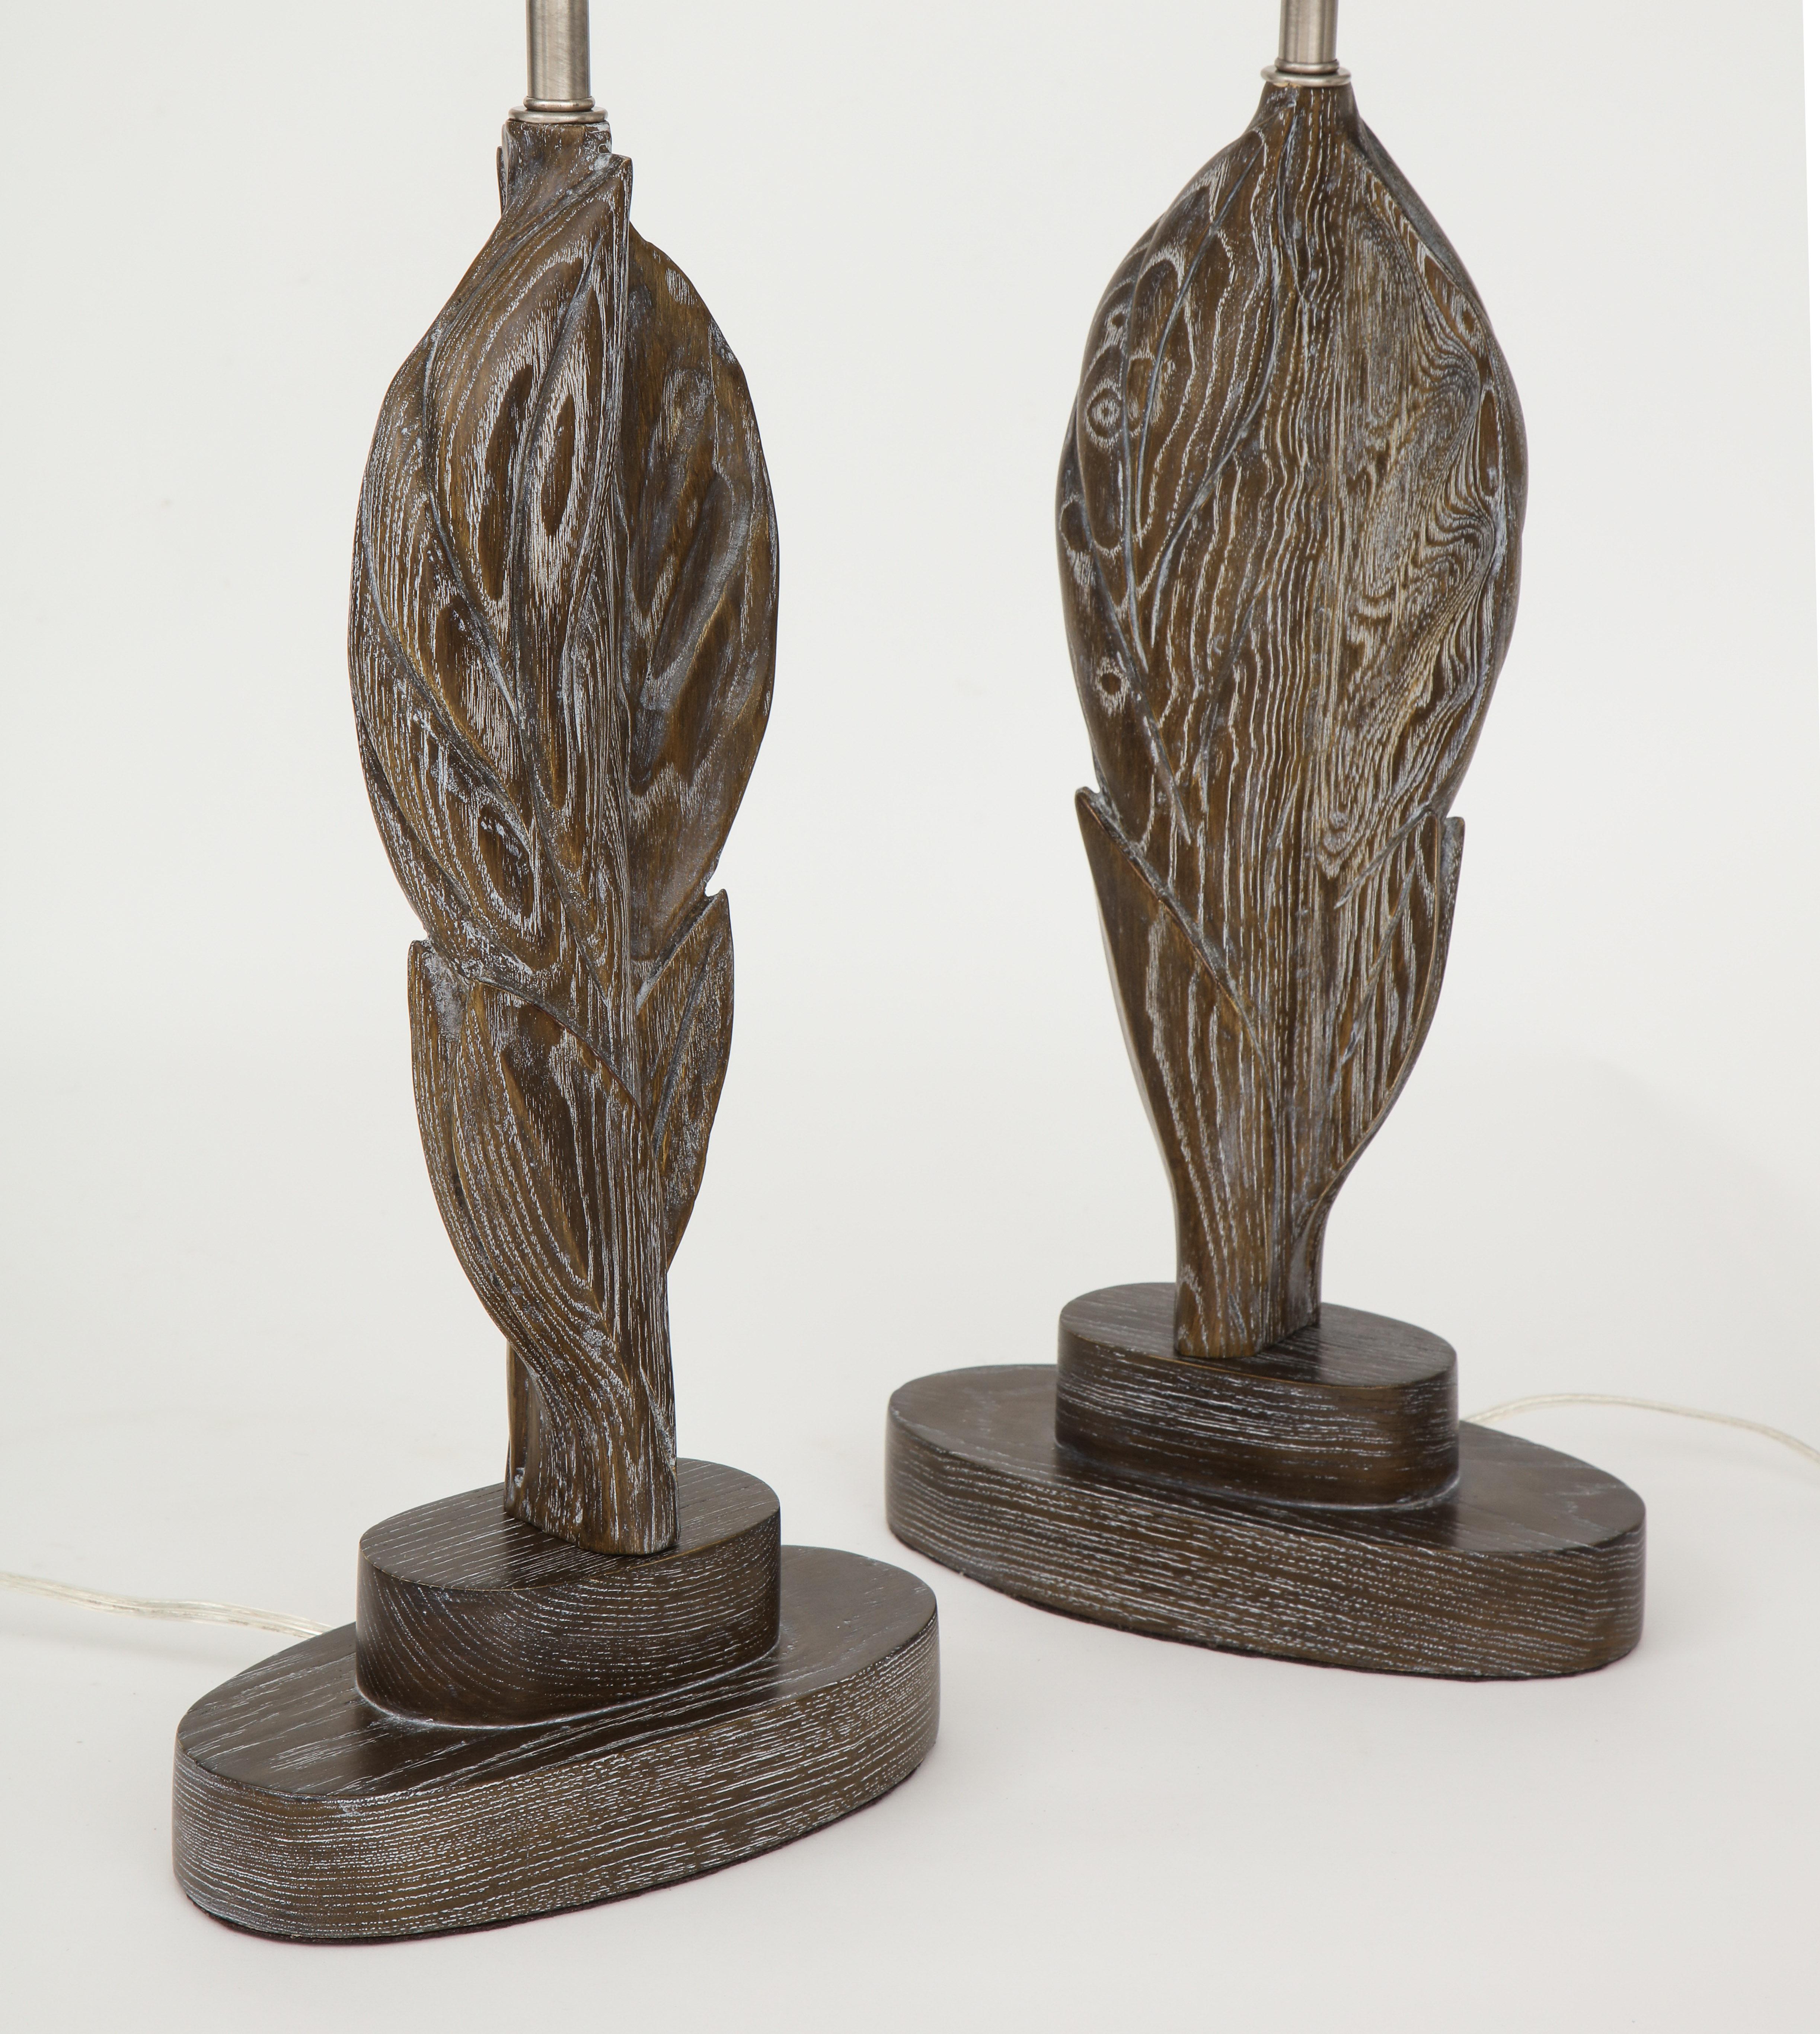 Pair of French Moderne hand carved oak stylized leaf lamps with a cerused finish. Rewired for use in the USA with satin nickel sockets, 100W max bulbs.